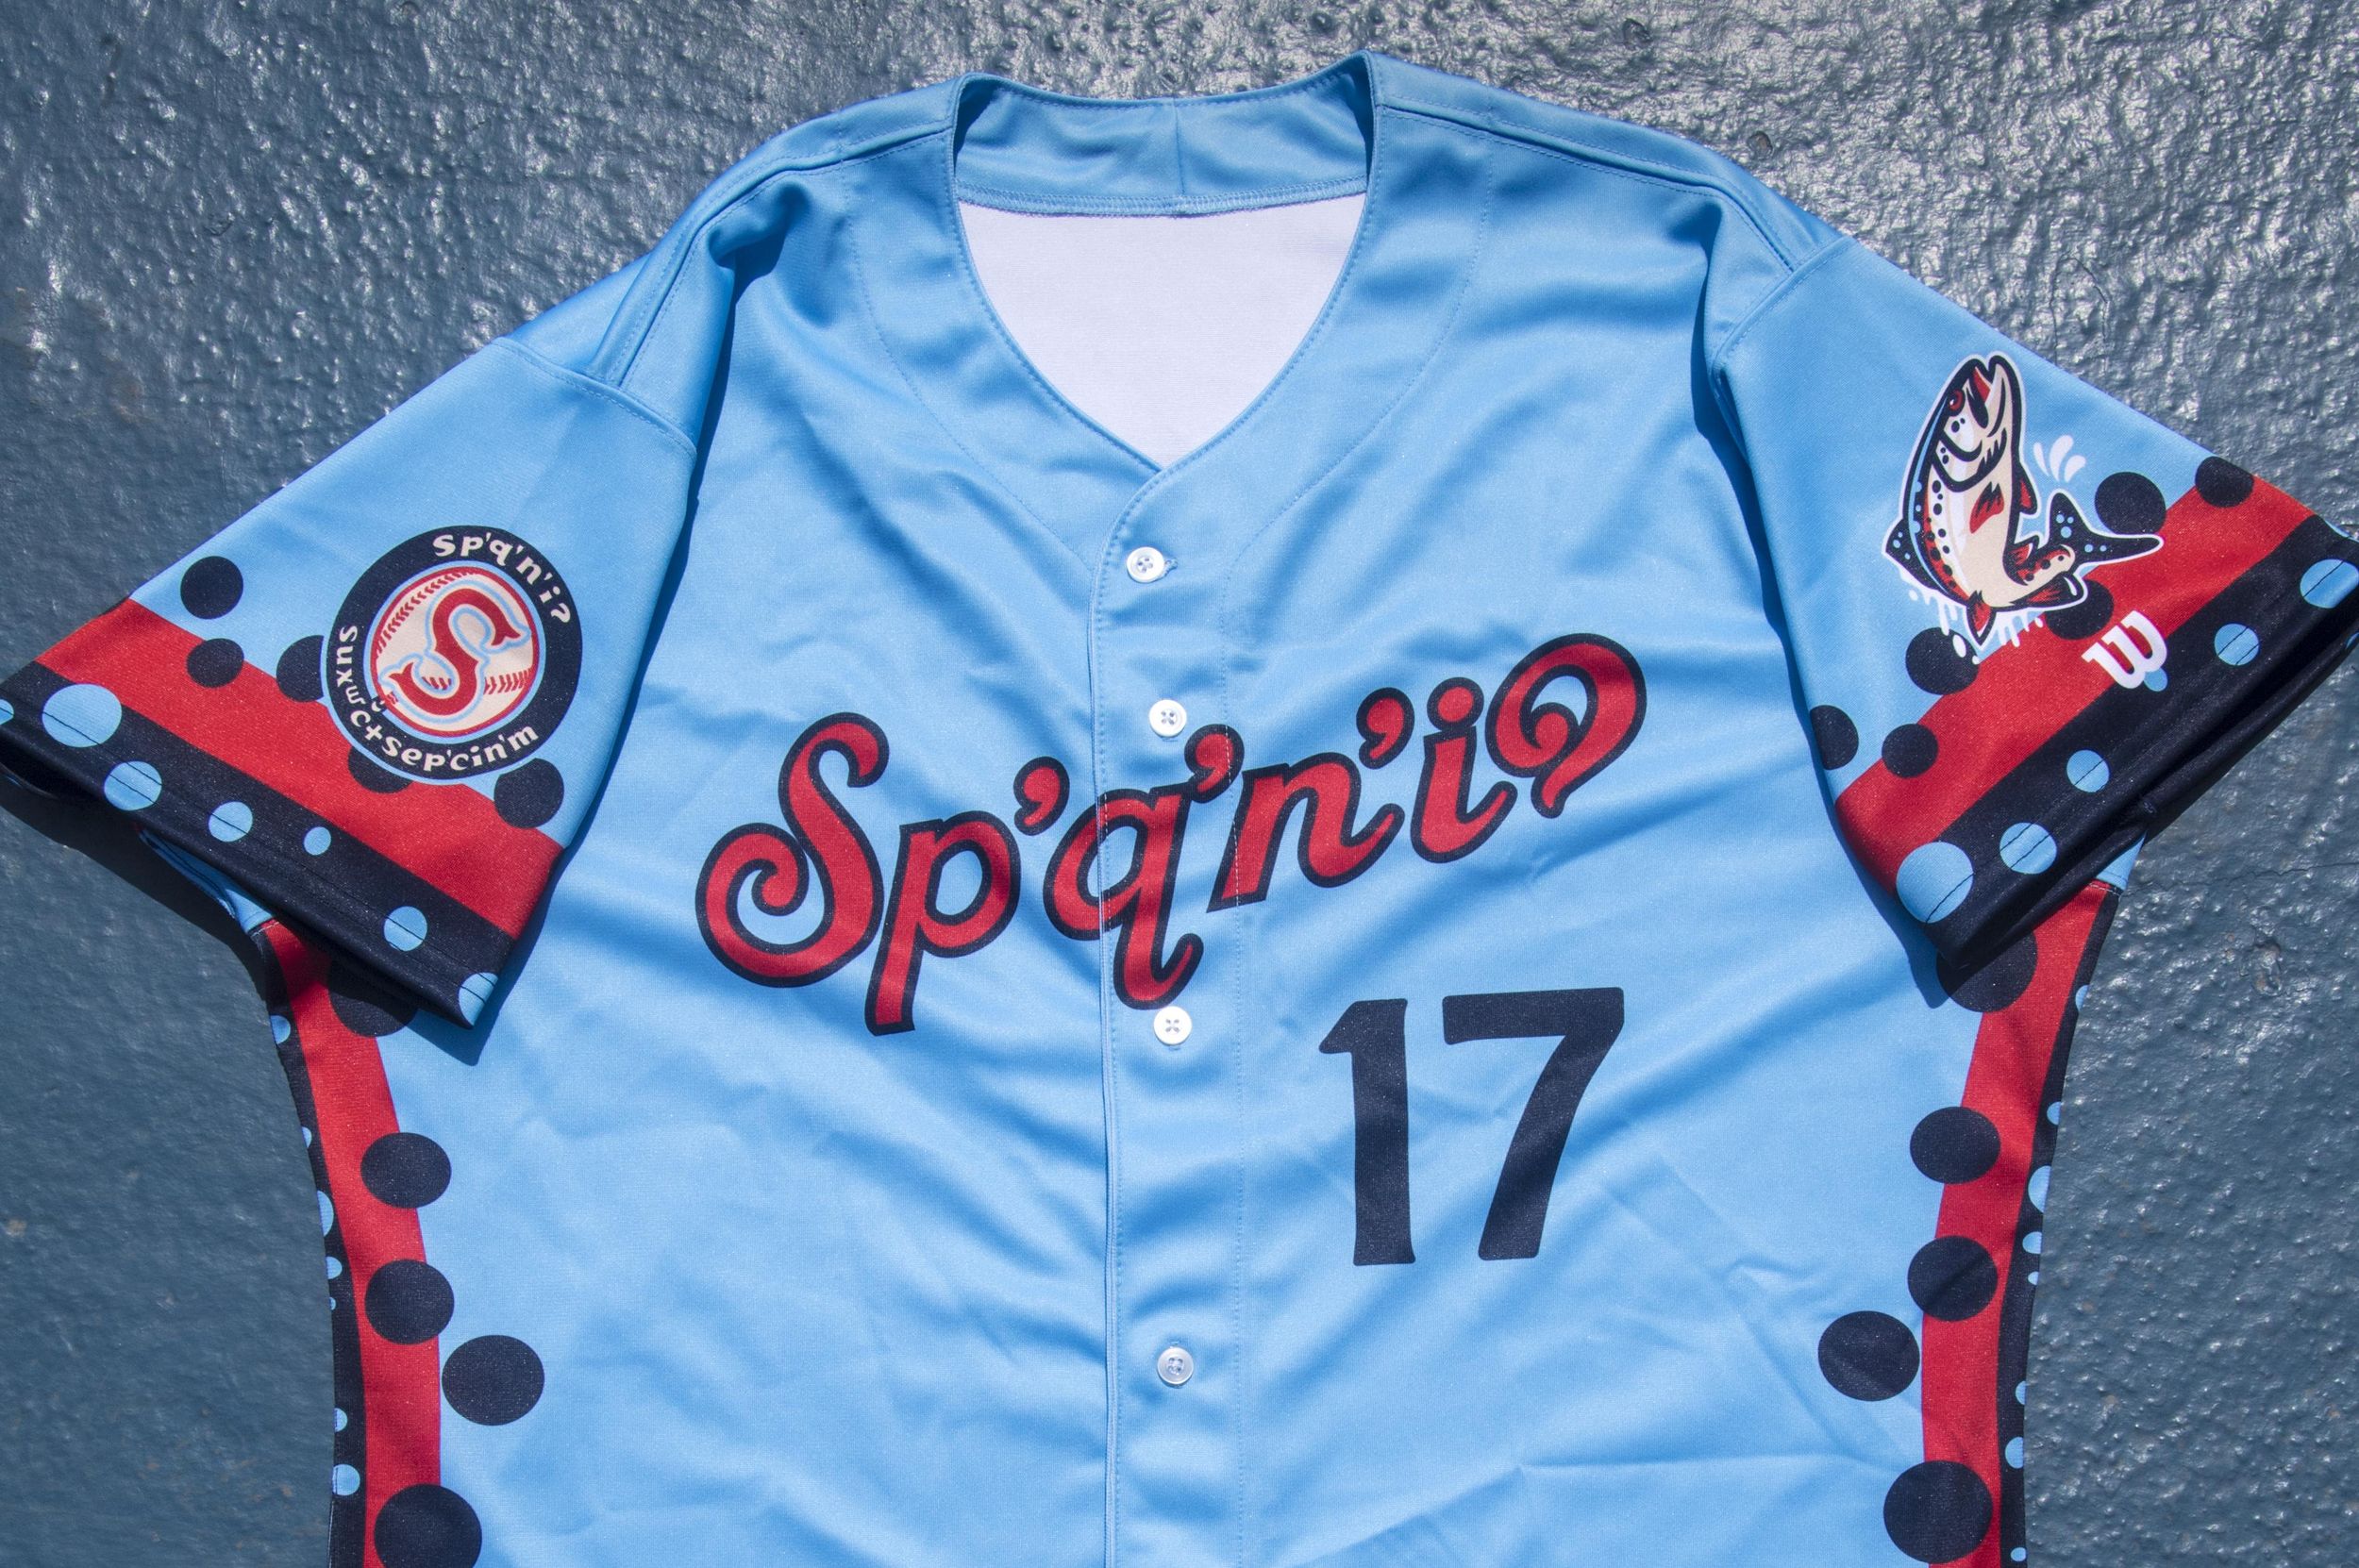 Spokane Indians break out Redband jerseys for first time this